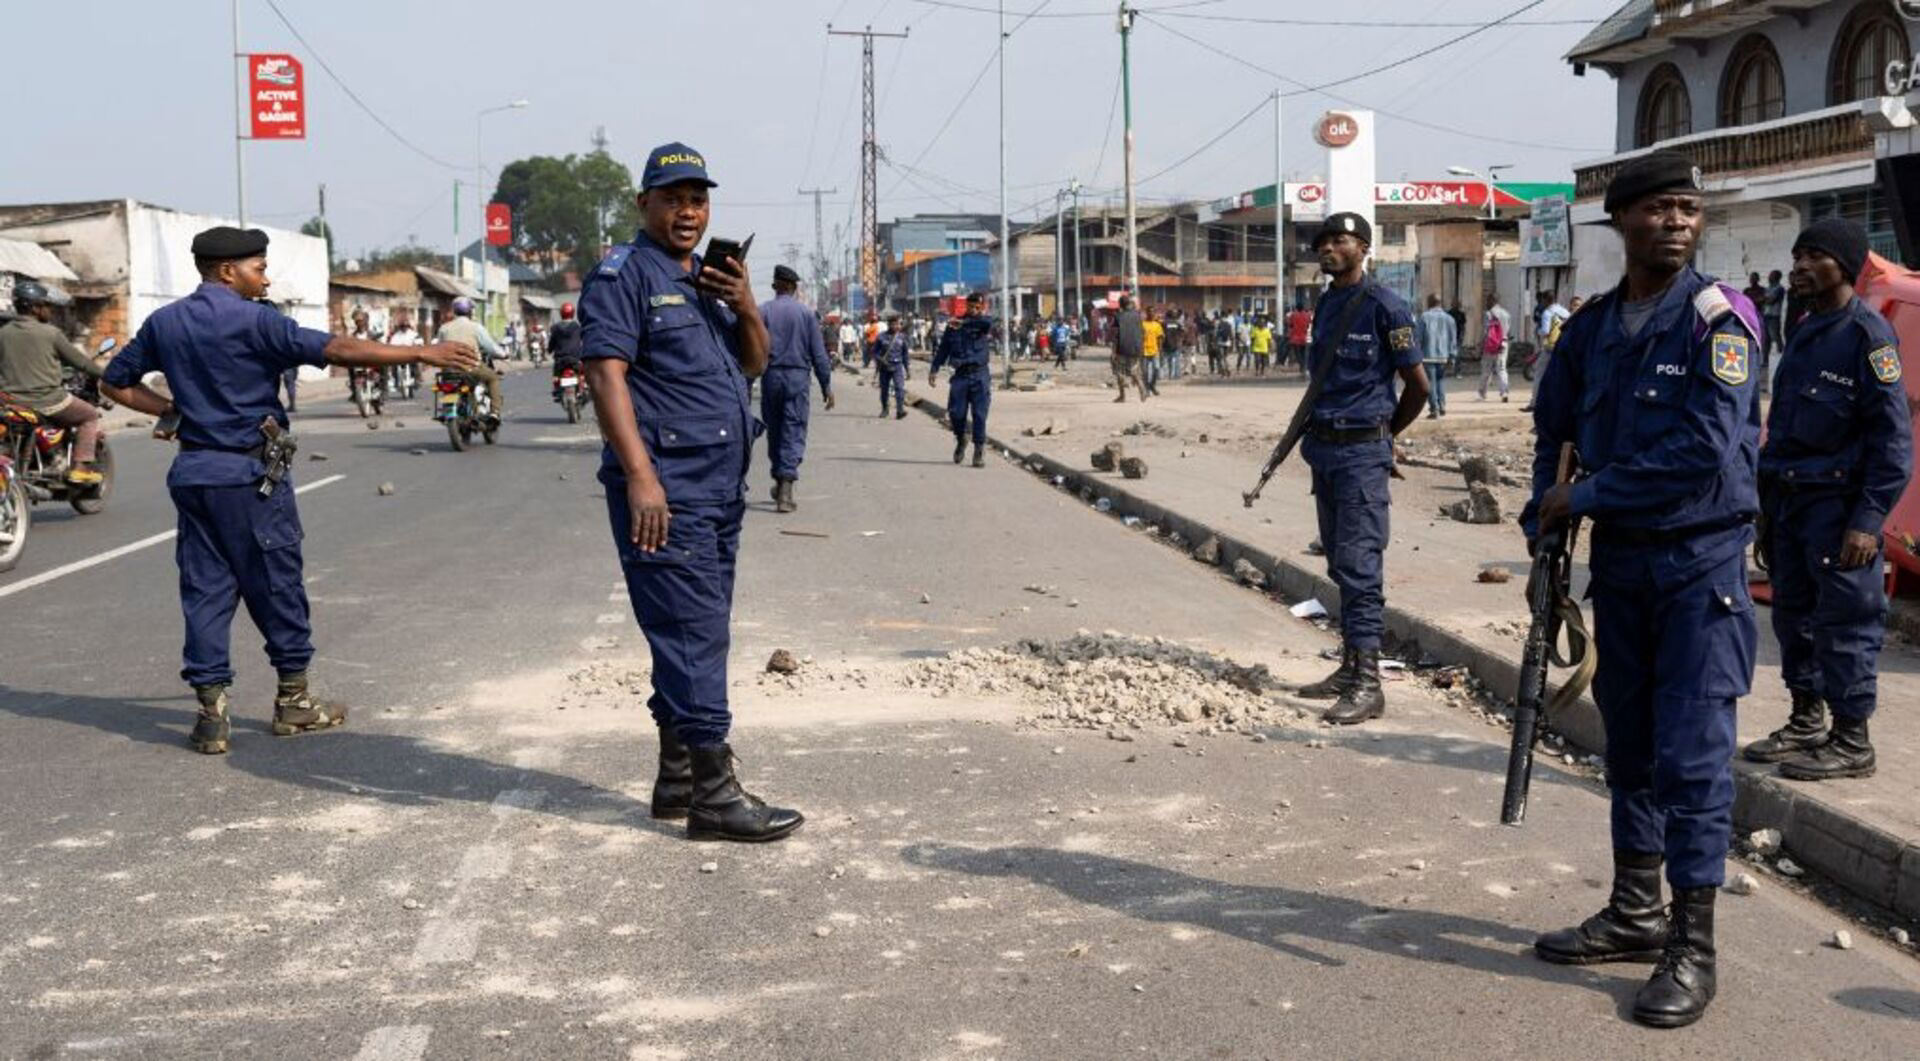 Two officers arrested in DR Congo for crackdown that killed 43 people